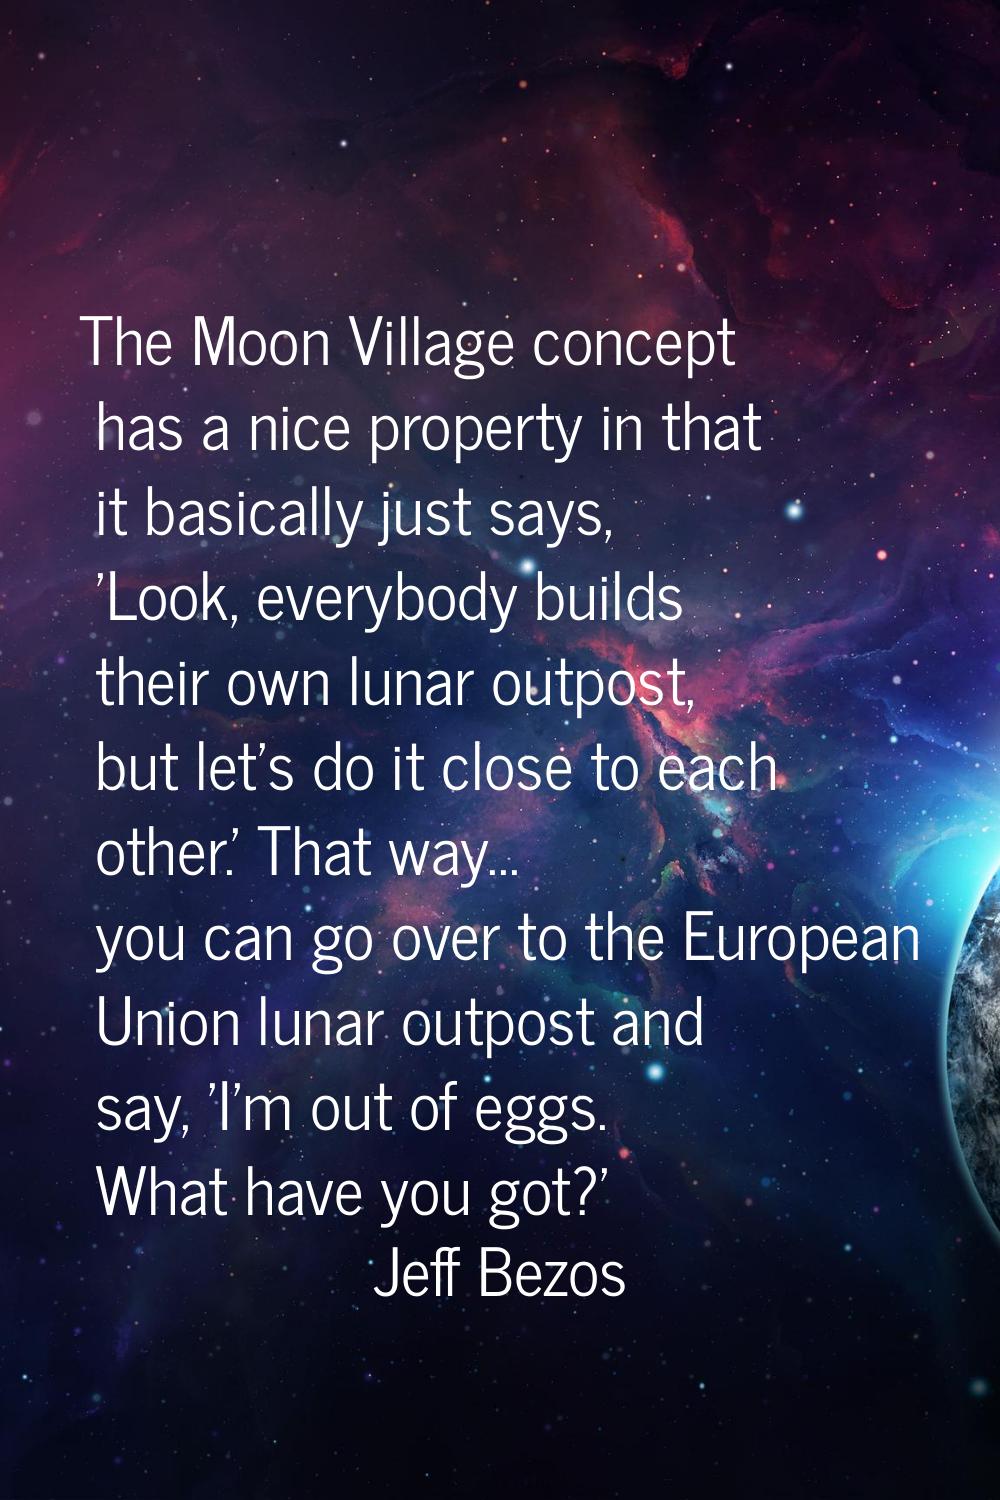 The Moon Village concept has a nice property in that it basically just says, 'Look, everybody build